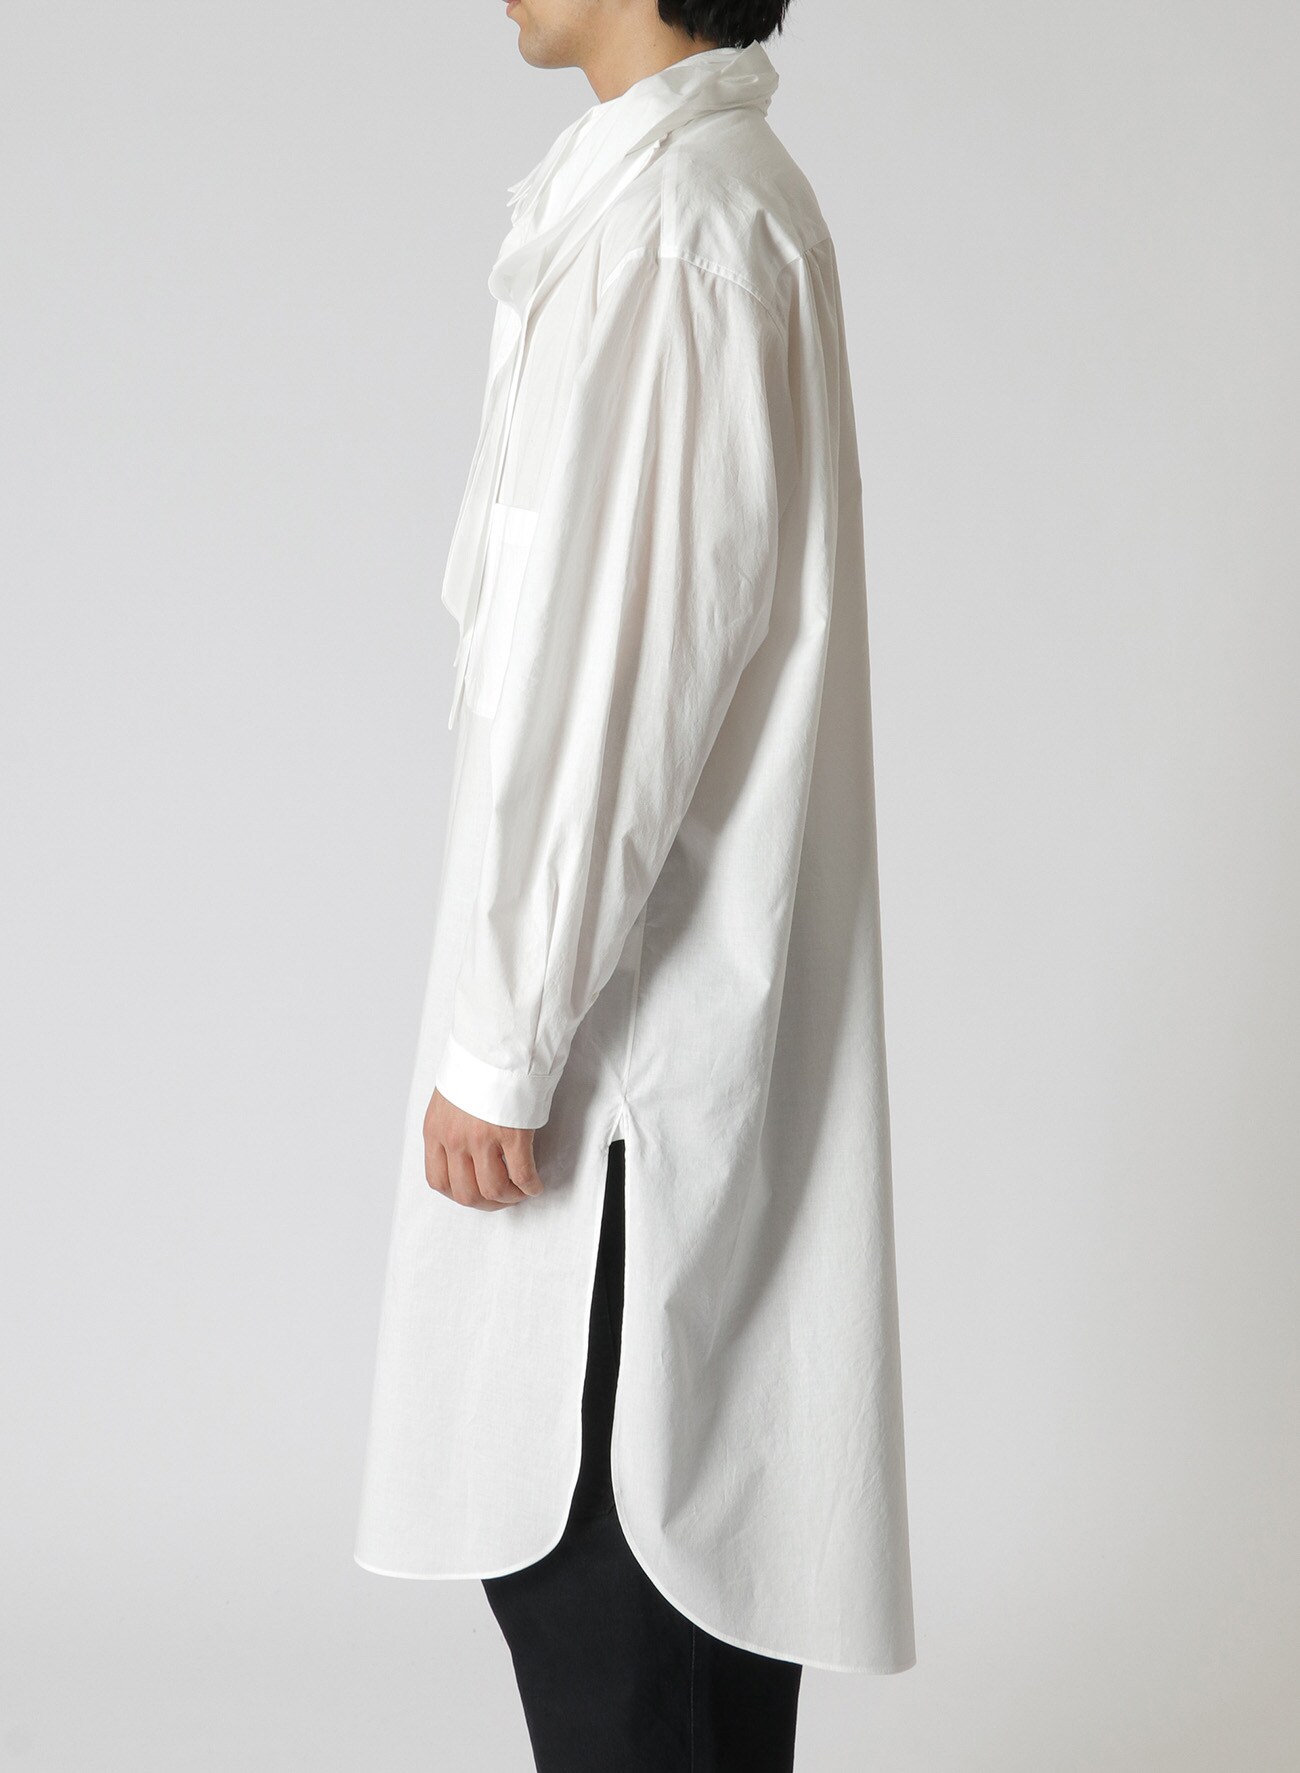 60/- LAWN S-BIG DETACHABLE WING C B (XS White): power of the WHITE 